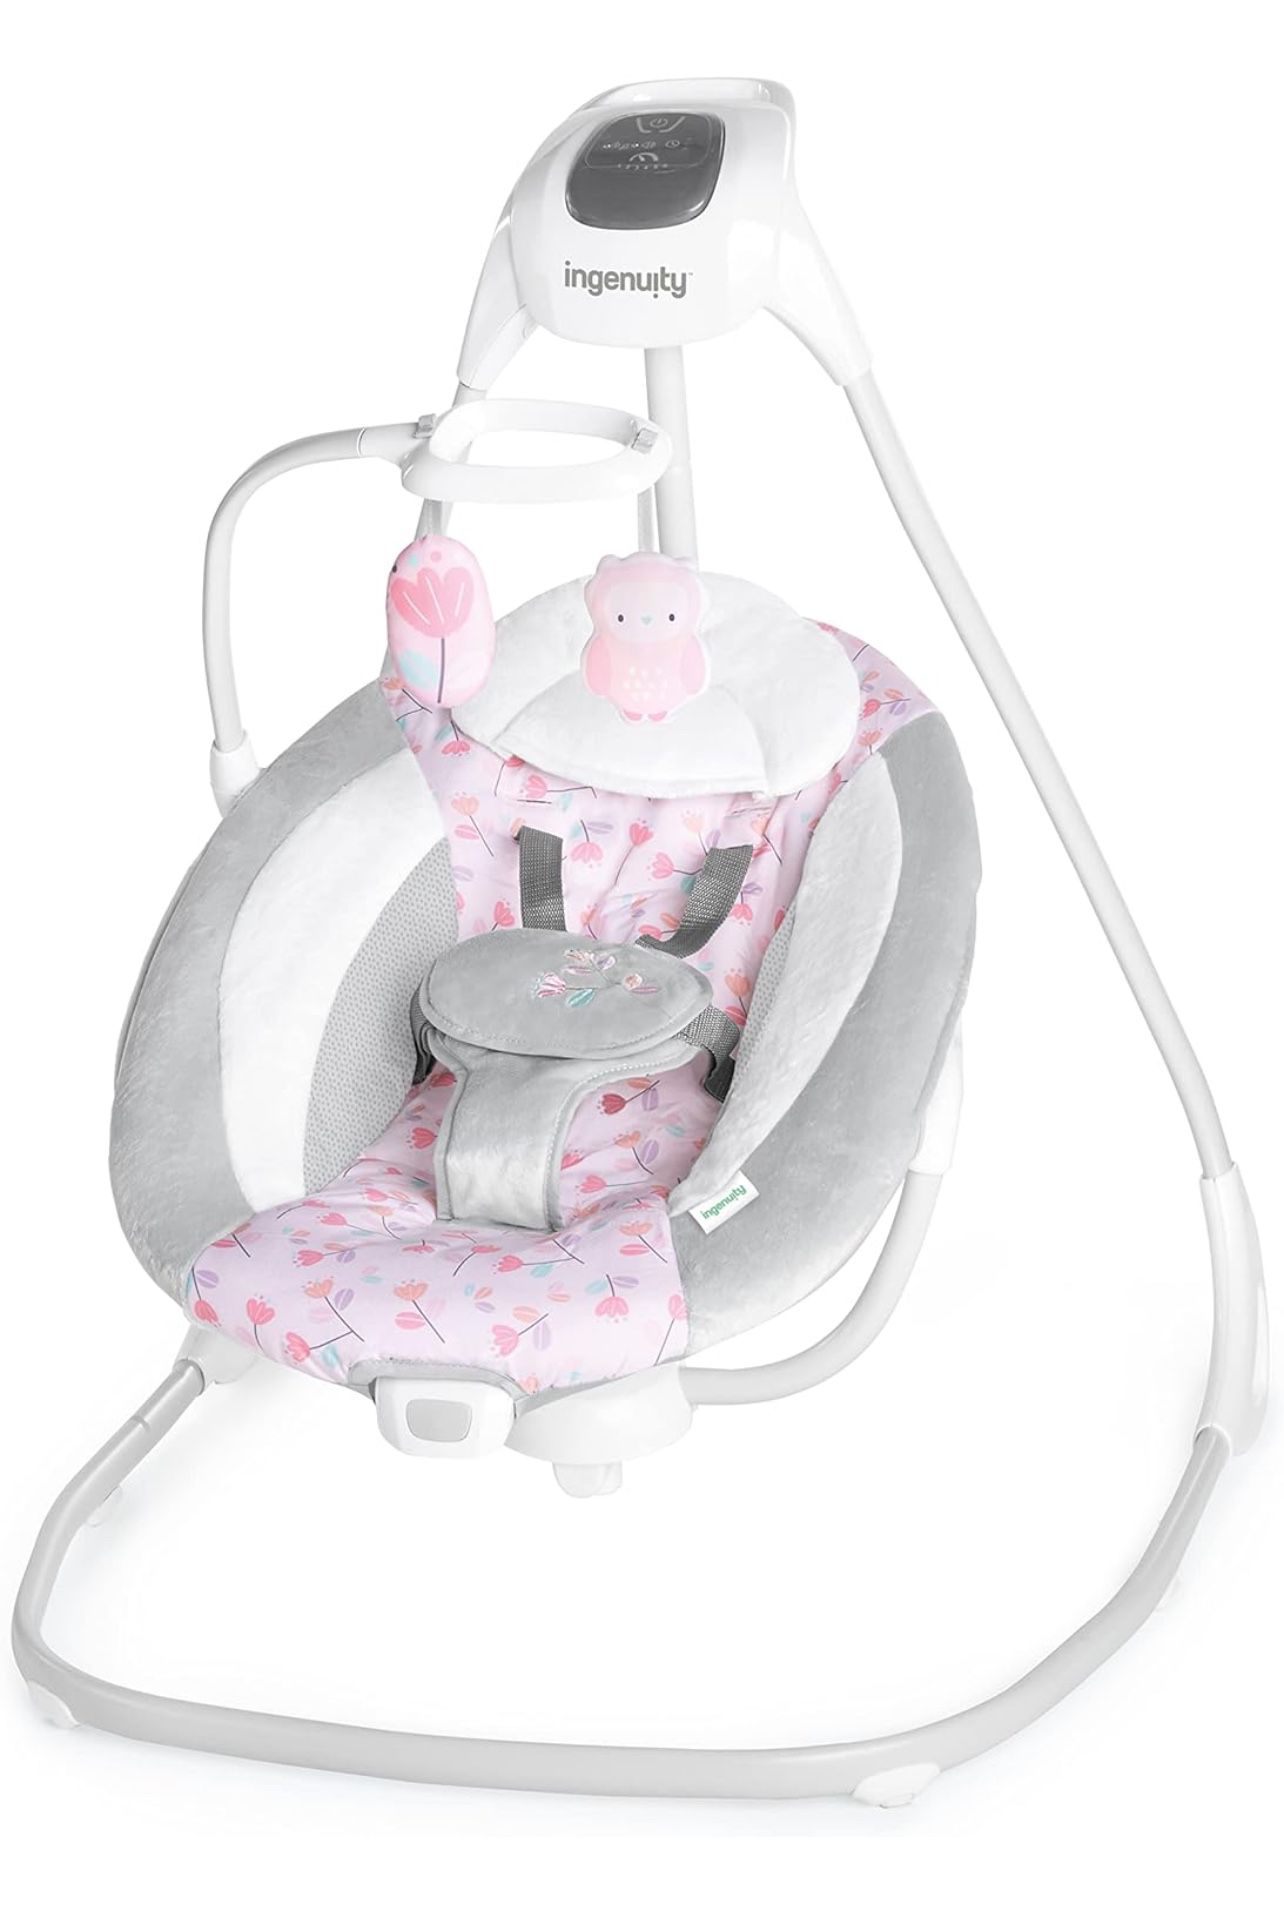 New 6 Speed Multi-Directional Baby Swing 